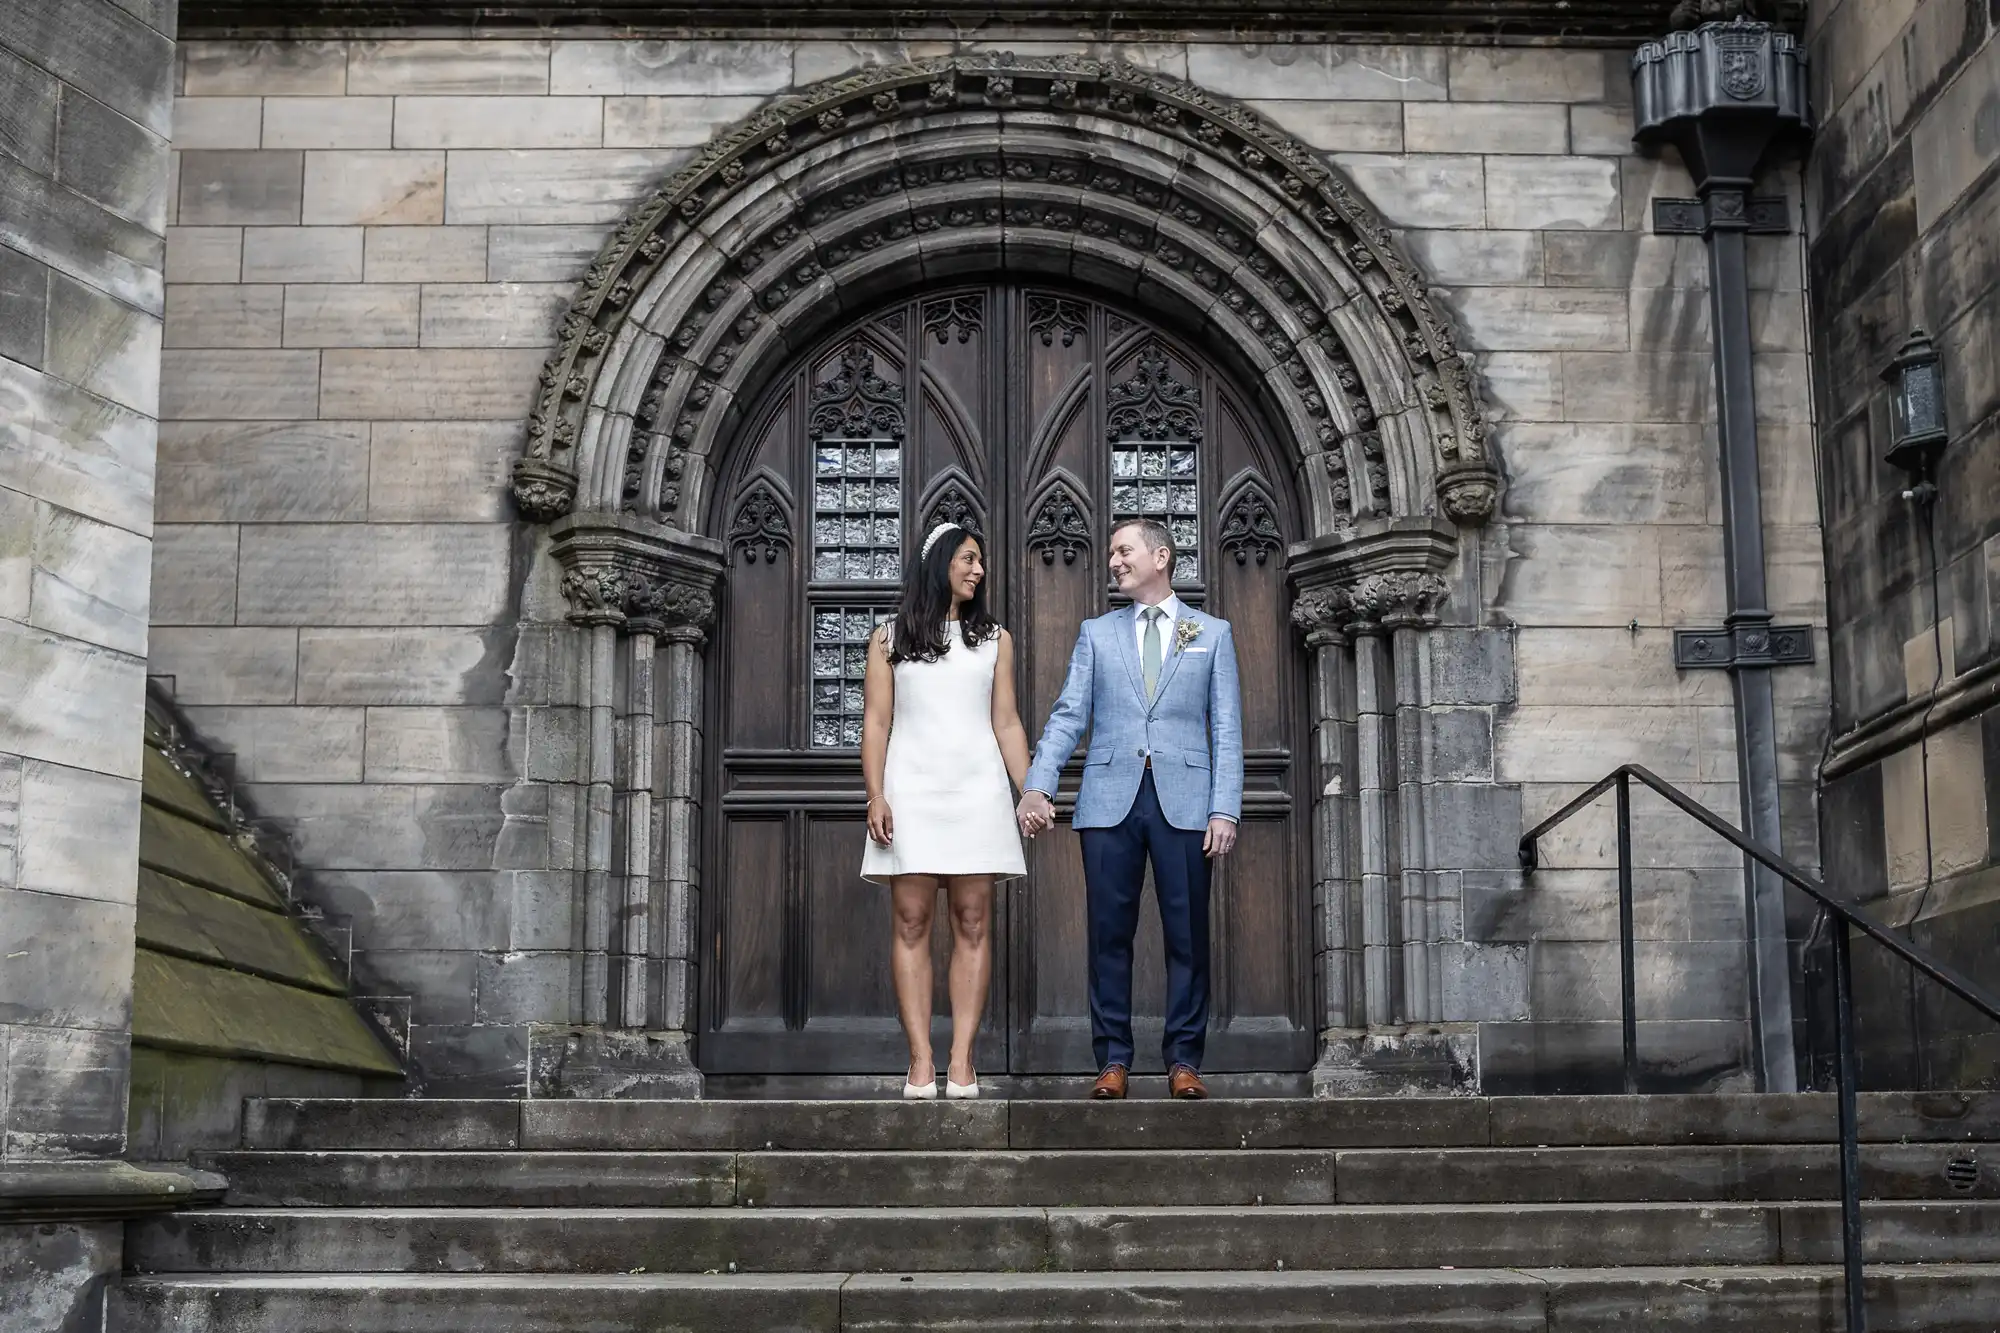 A couple stands hand in hand on stone steps in front of an ornate, arched wooden door set in a stone wall. The woman wears a white dress; the man wears a light blue jacket and dark trousers.